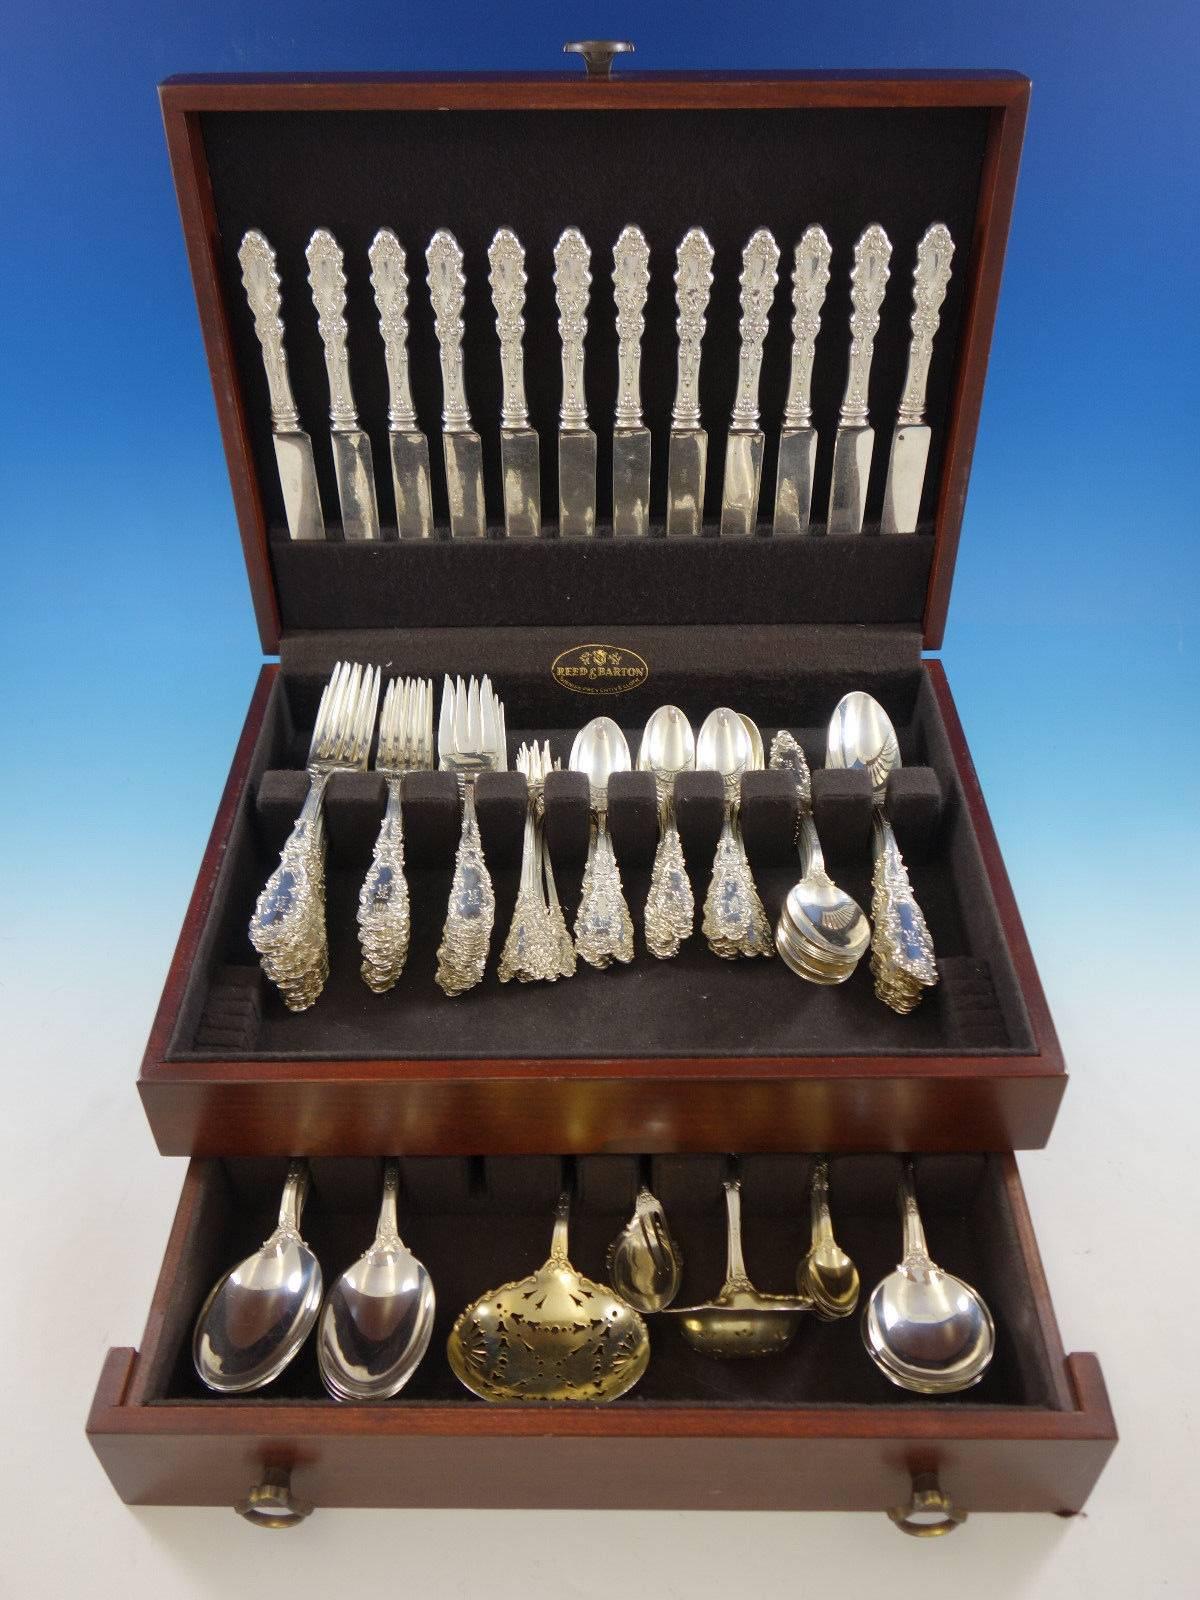 Luxembourg by Gorham sterling silver flatware set, 132 pieces. This set includes: 

12 regular knives, 8 1/2